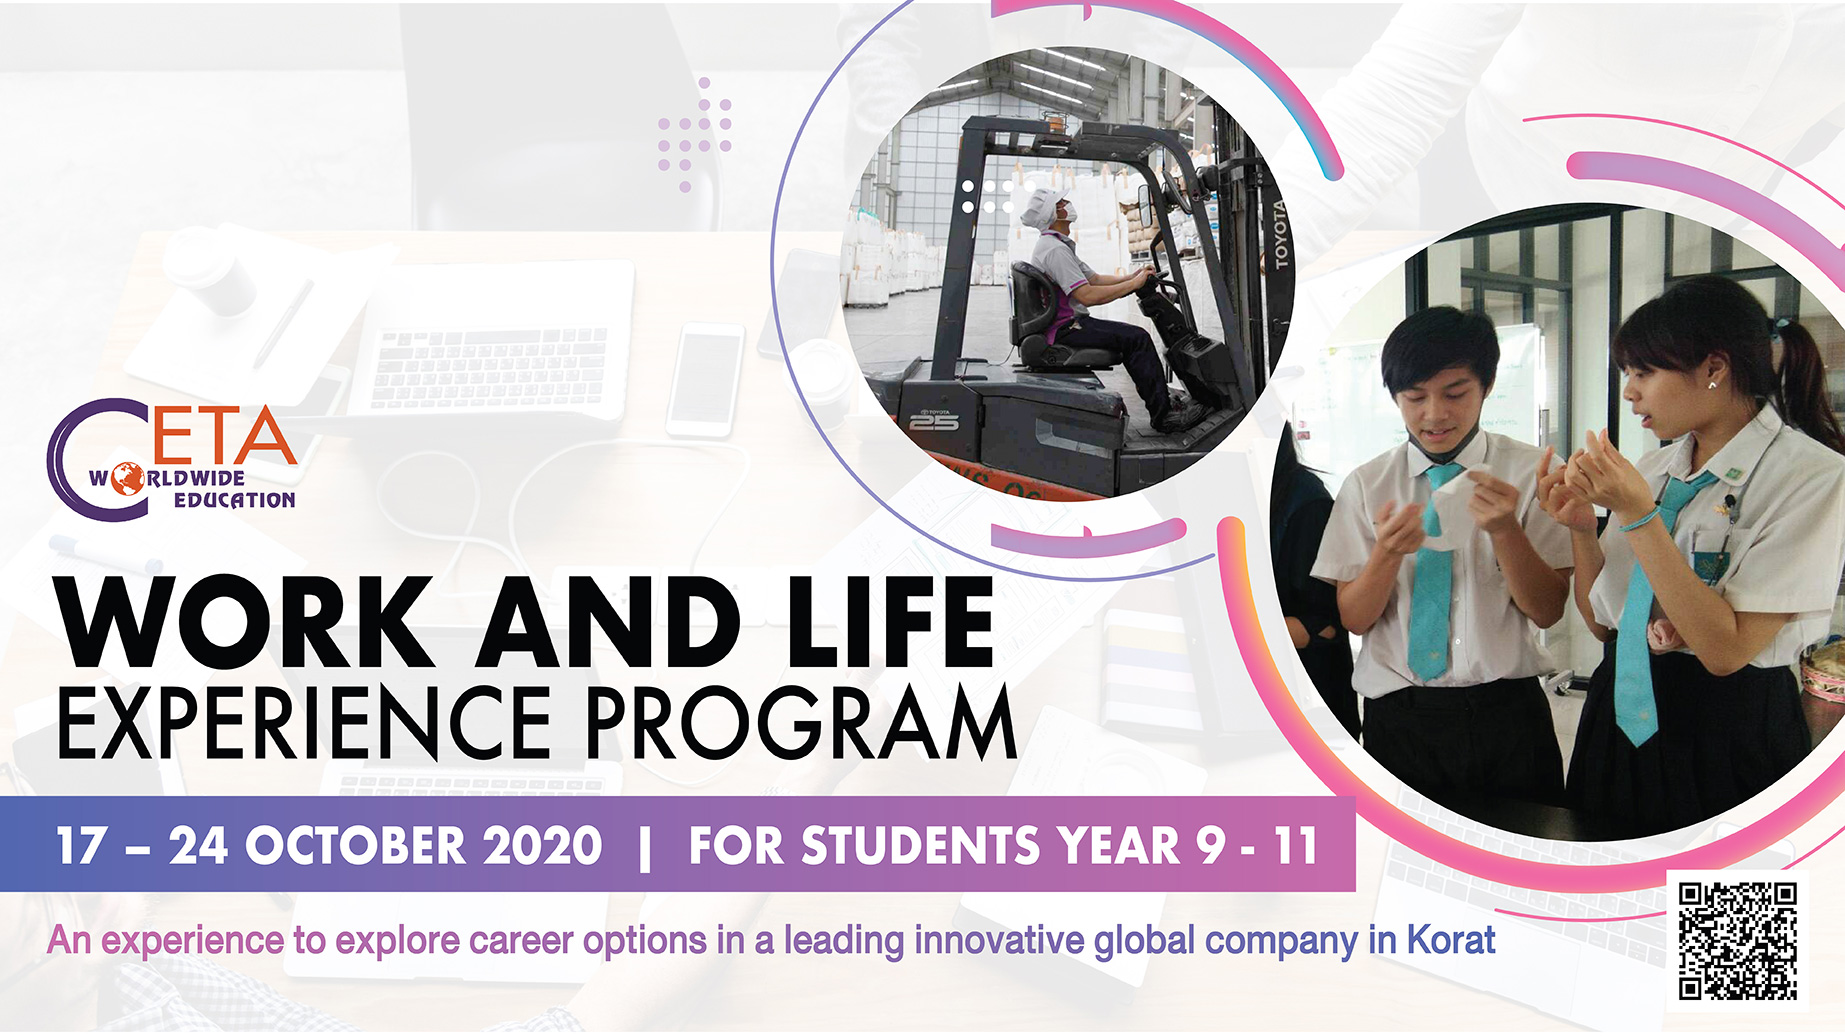 WORK AND LIFE EXPERIENCE PROGRAM